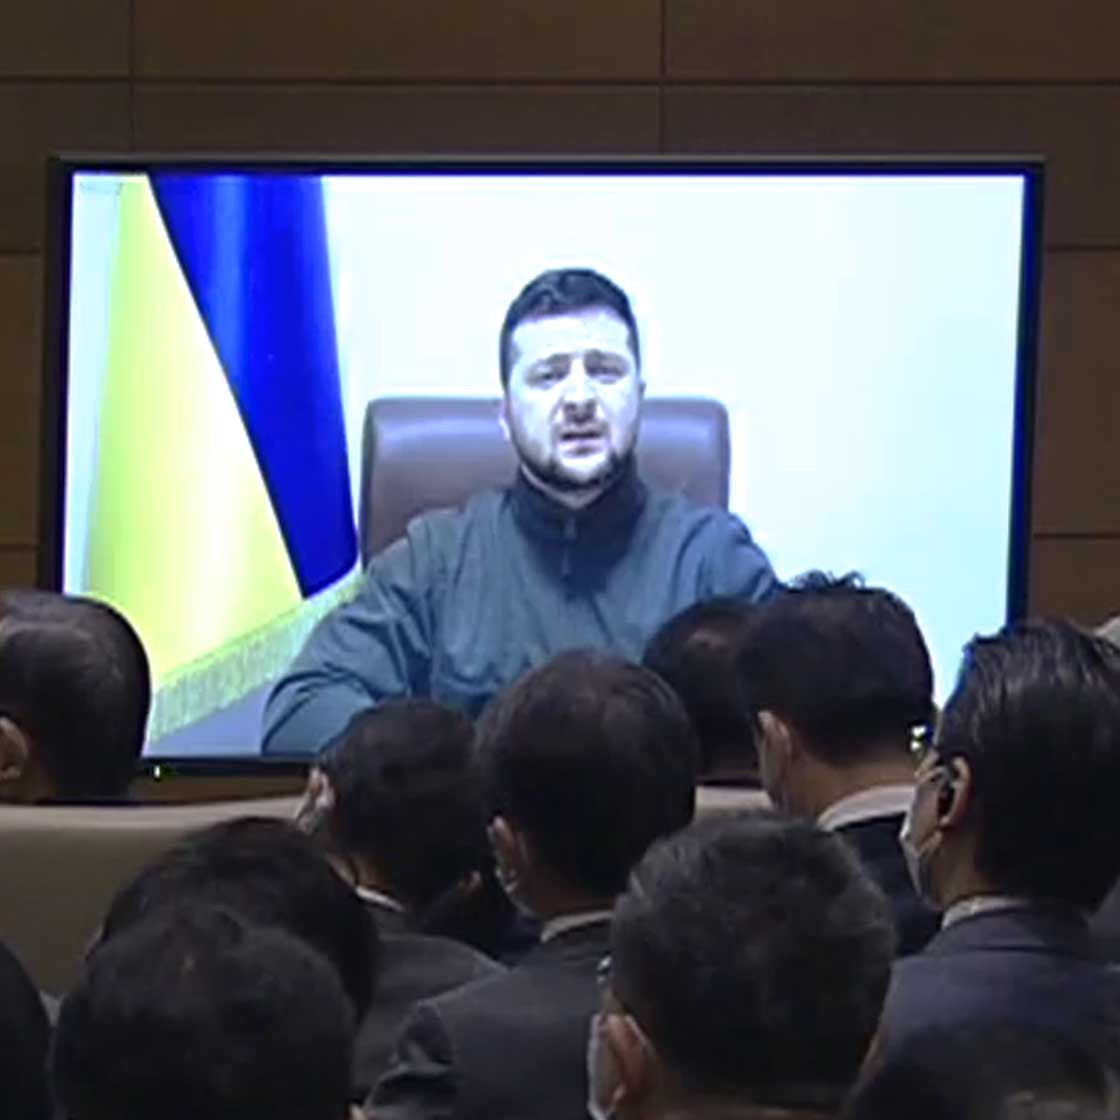 Zelenskyy's address to Japan's lawmakers crafted for maximum effect